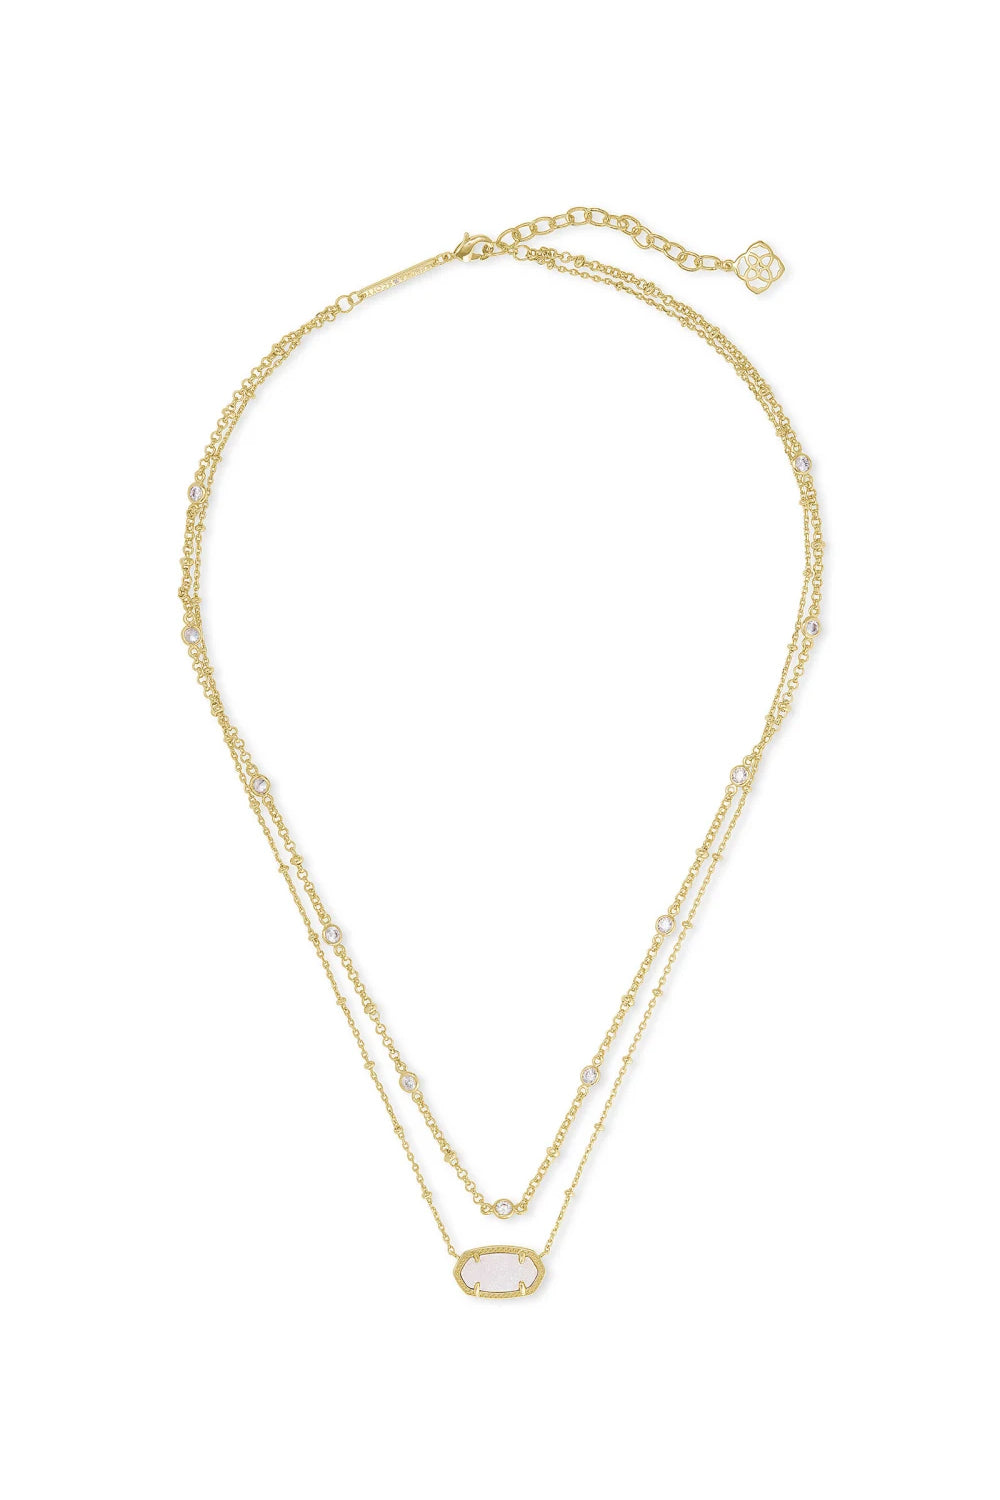 Kendra Scott Emilie Oval Multi Strand Necklace in Sand Drusy and Rose Gold  | eBay